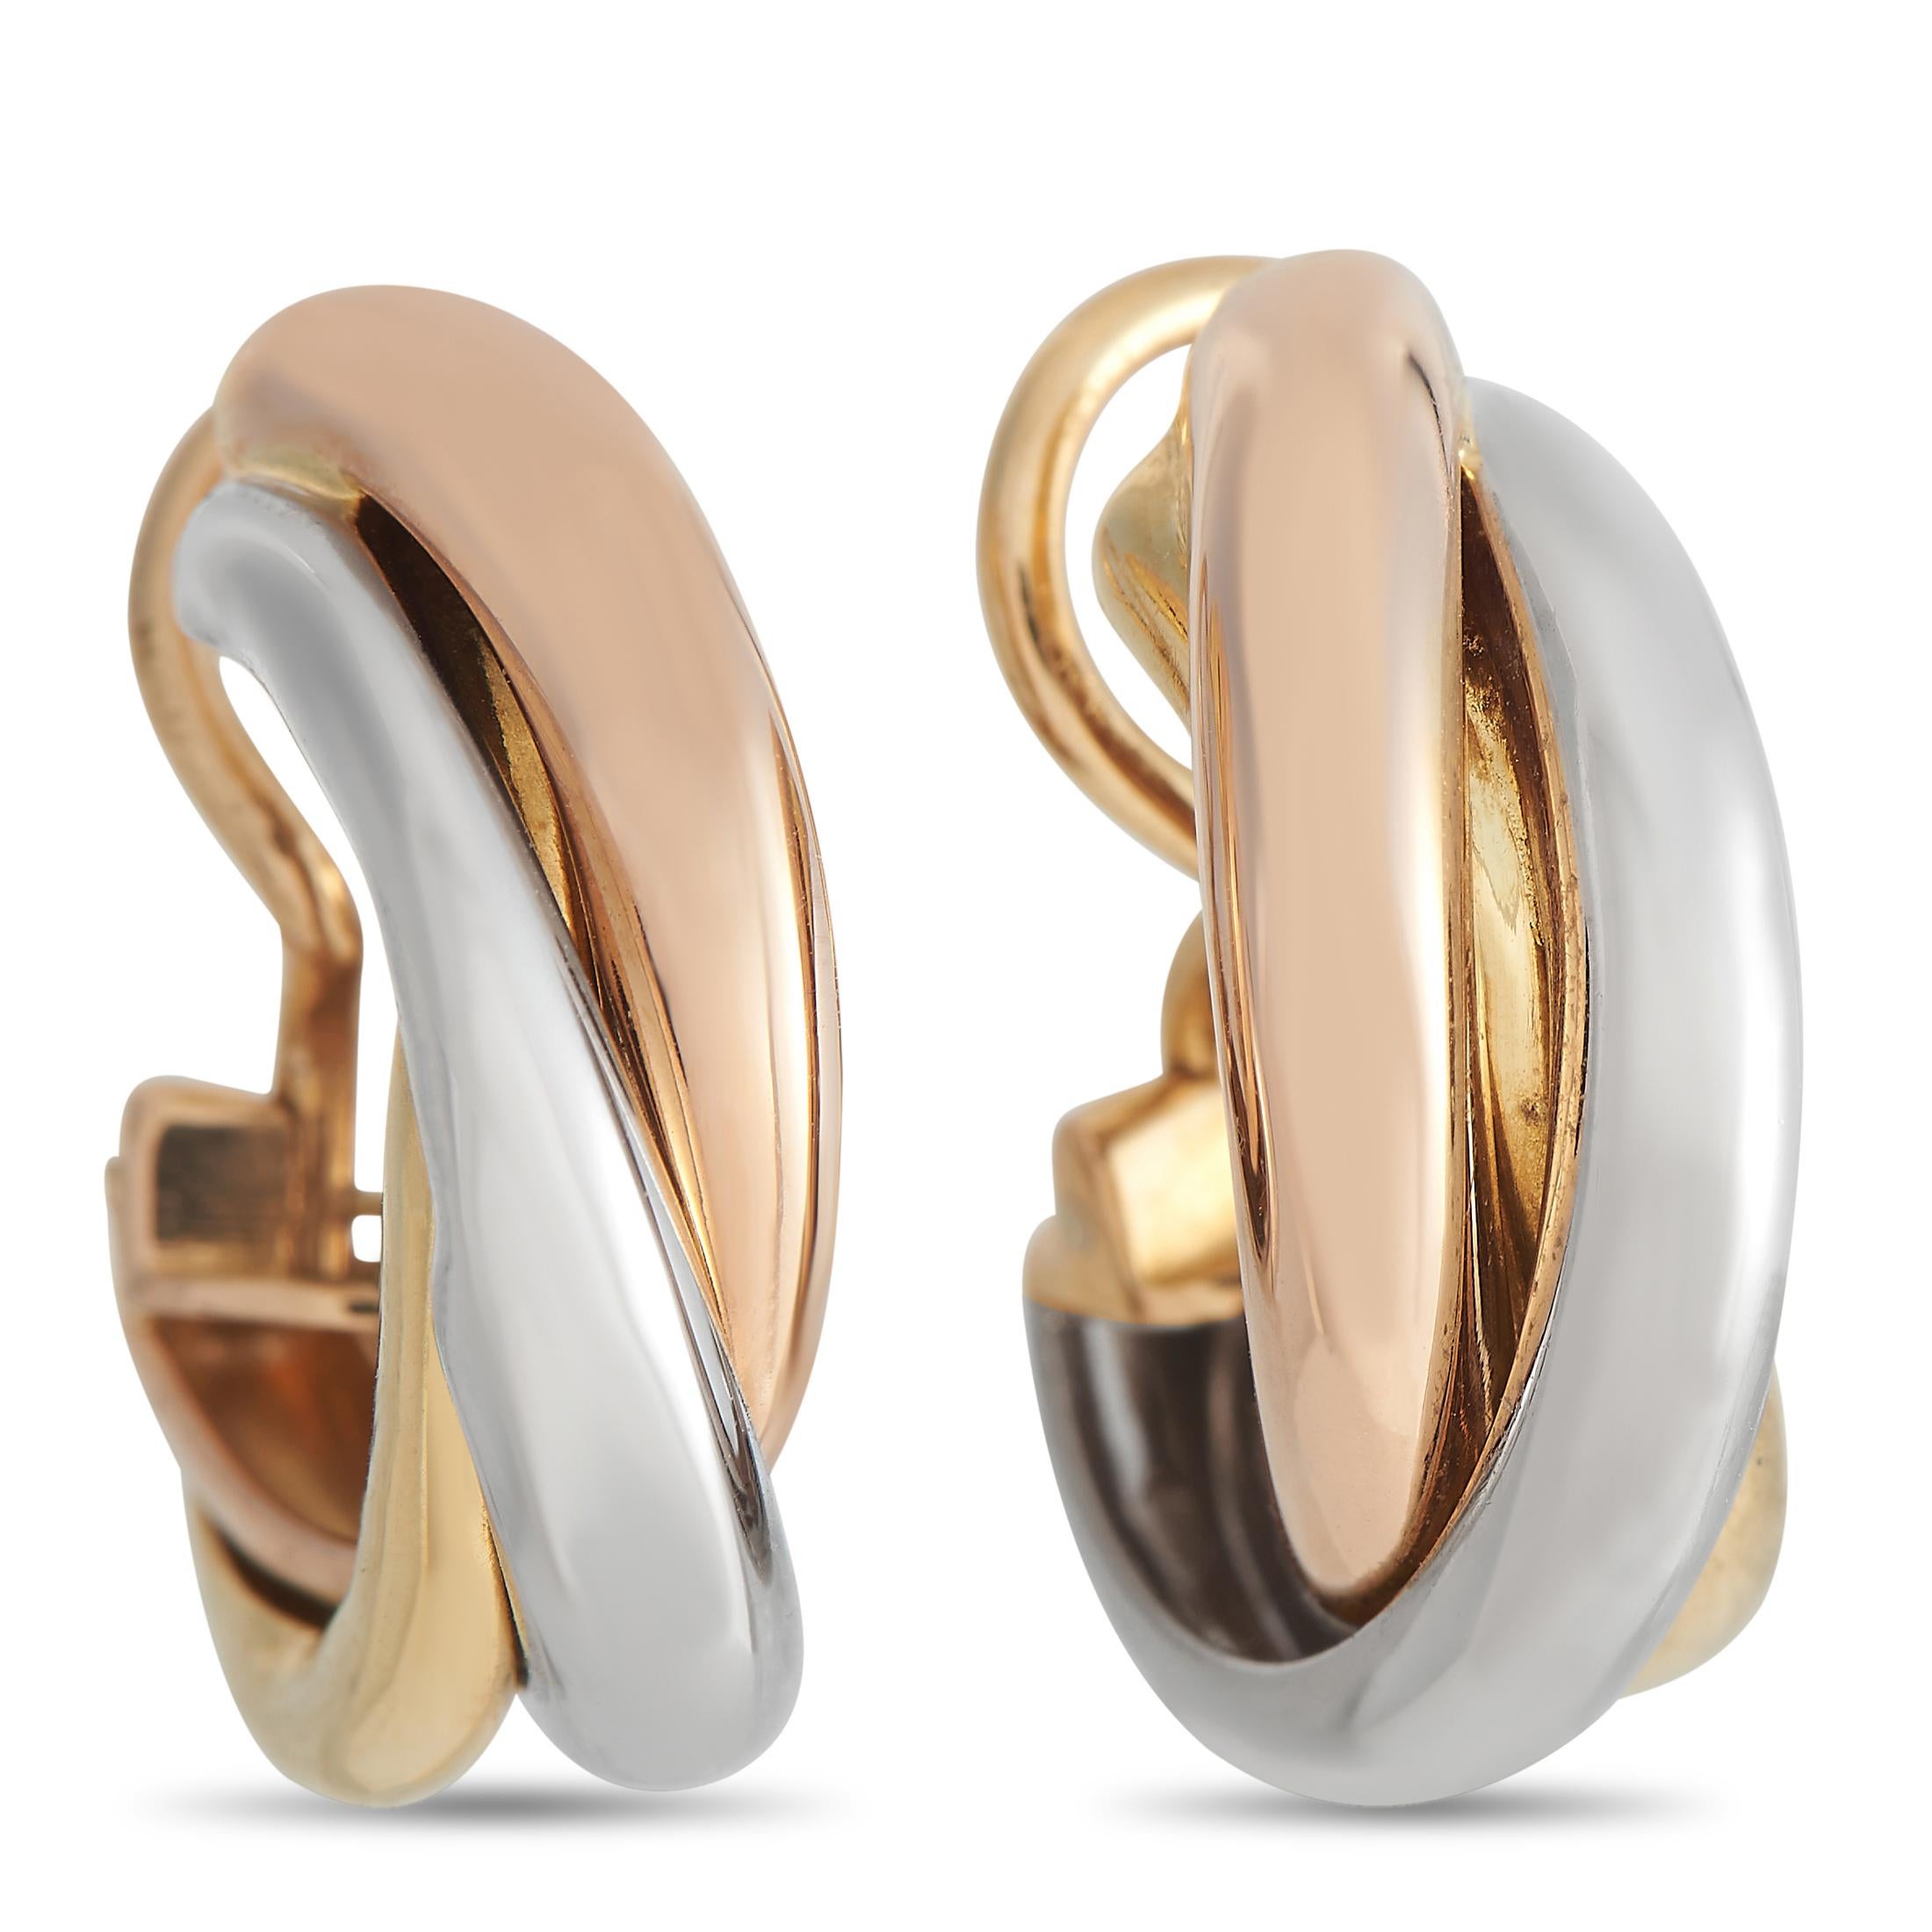 Just as their name suggests, these Cartier Trinity earrings feature a trio of glistening precious metals. Bold bands of 18K Yellow Gold, 18K Rose Gold, and 18K White Gold come together in perfect harmony on these exquisite luxury earrings, which